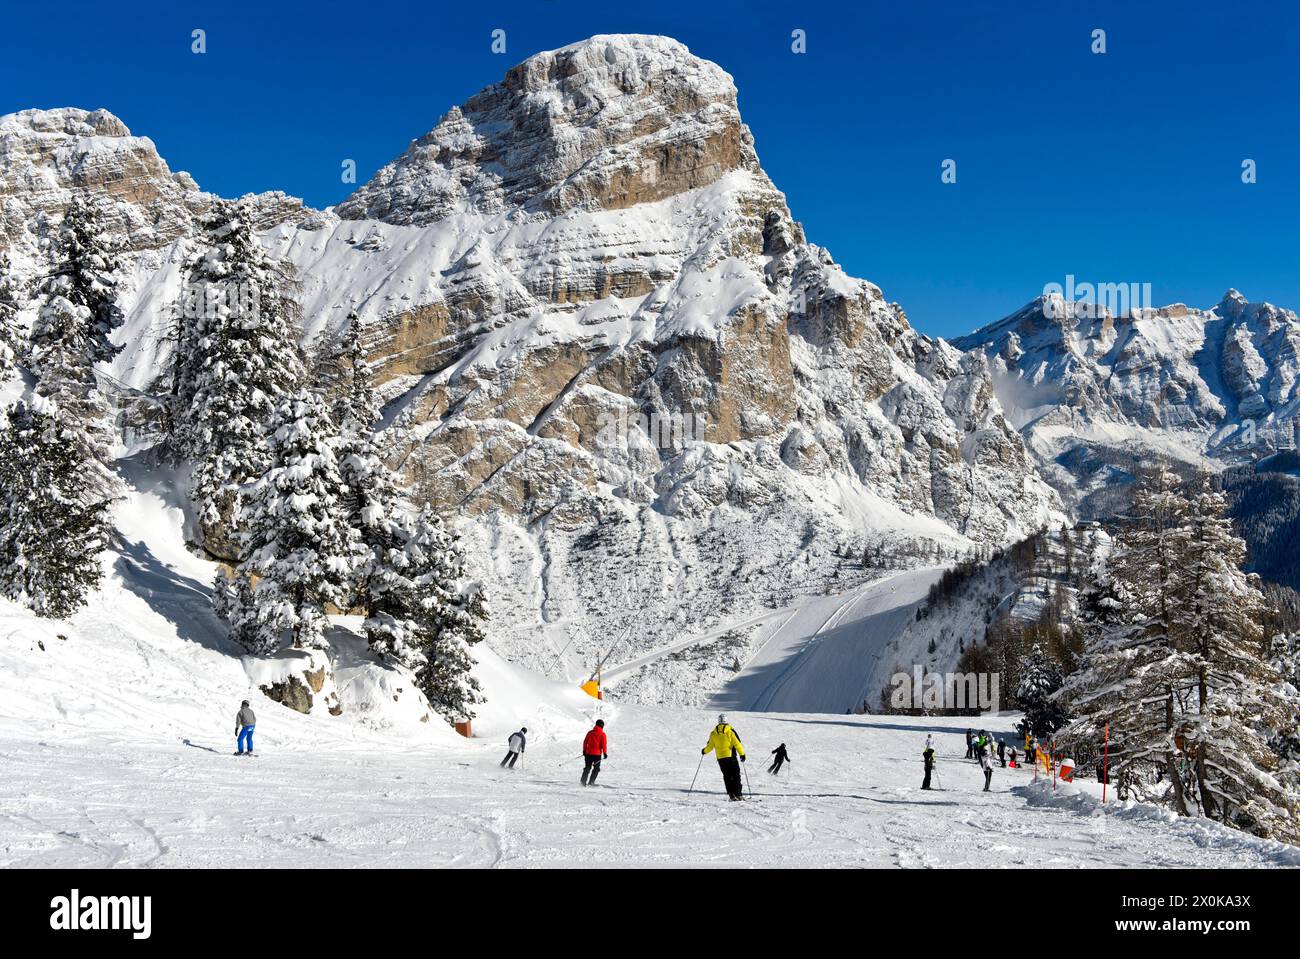 Skiers on a slope in the winter sports resort of Colfosco, Colfosco, at the foot of the Sassongher peak in the Alta Badia ski area, Dolomites, South Tyrol, Italy Stock Photo